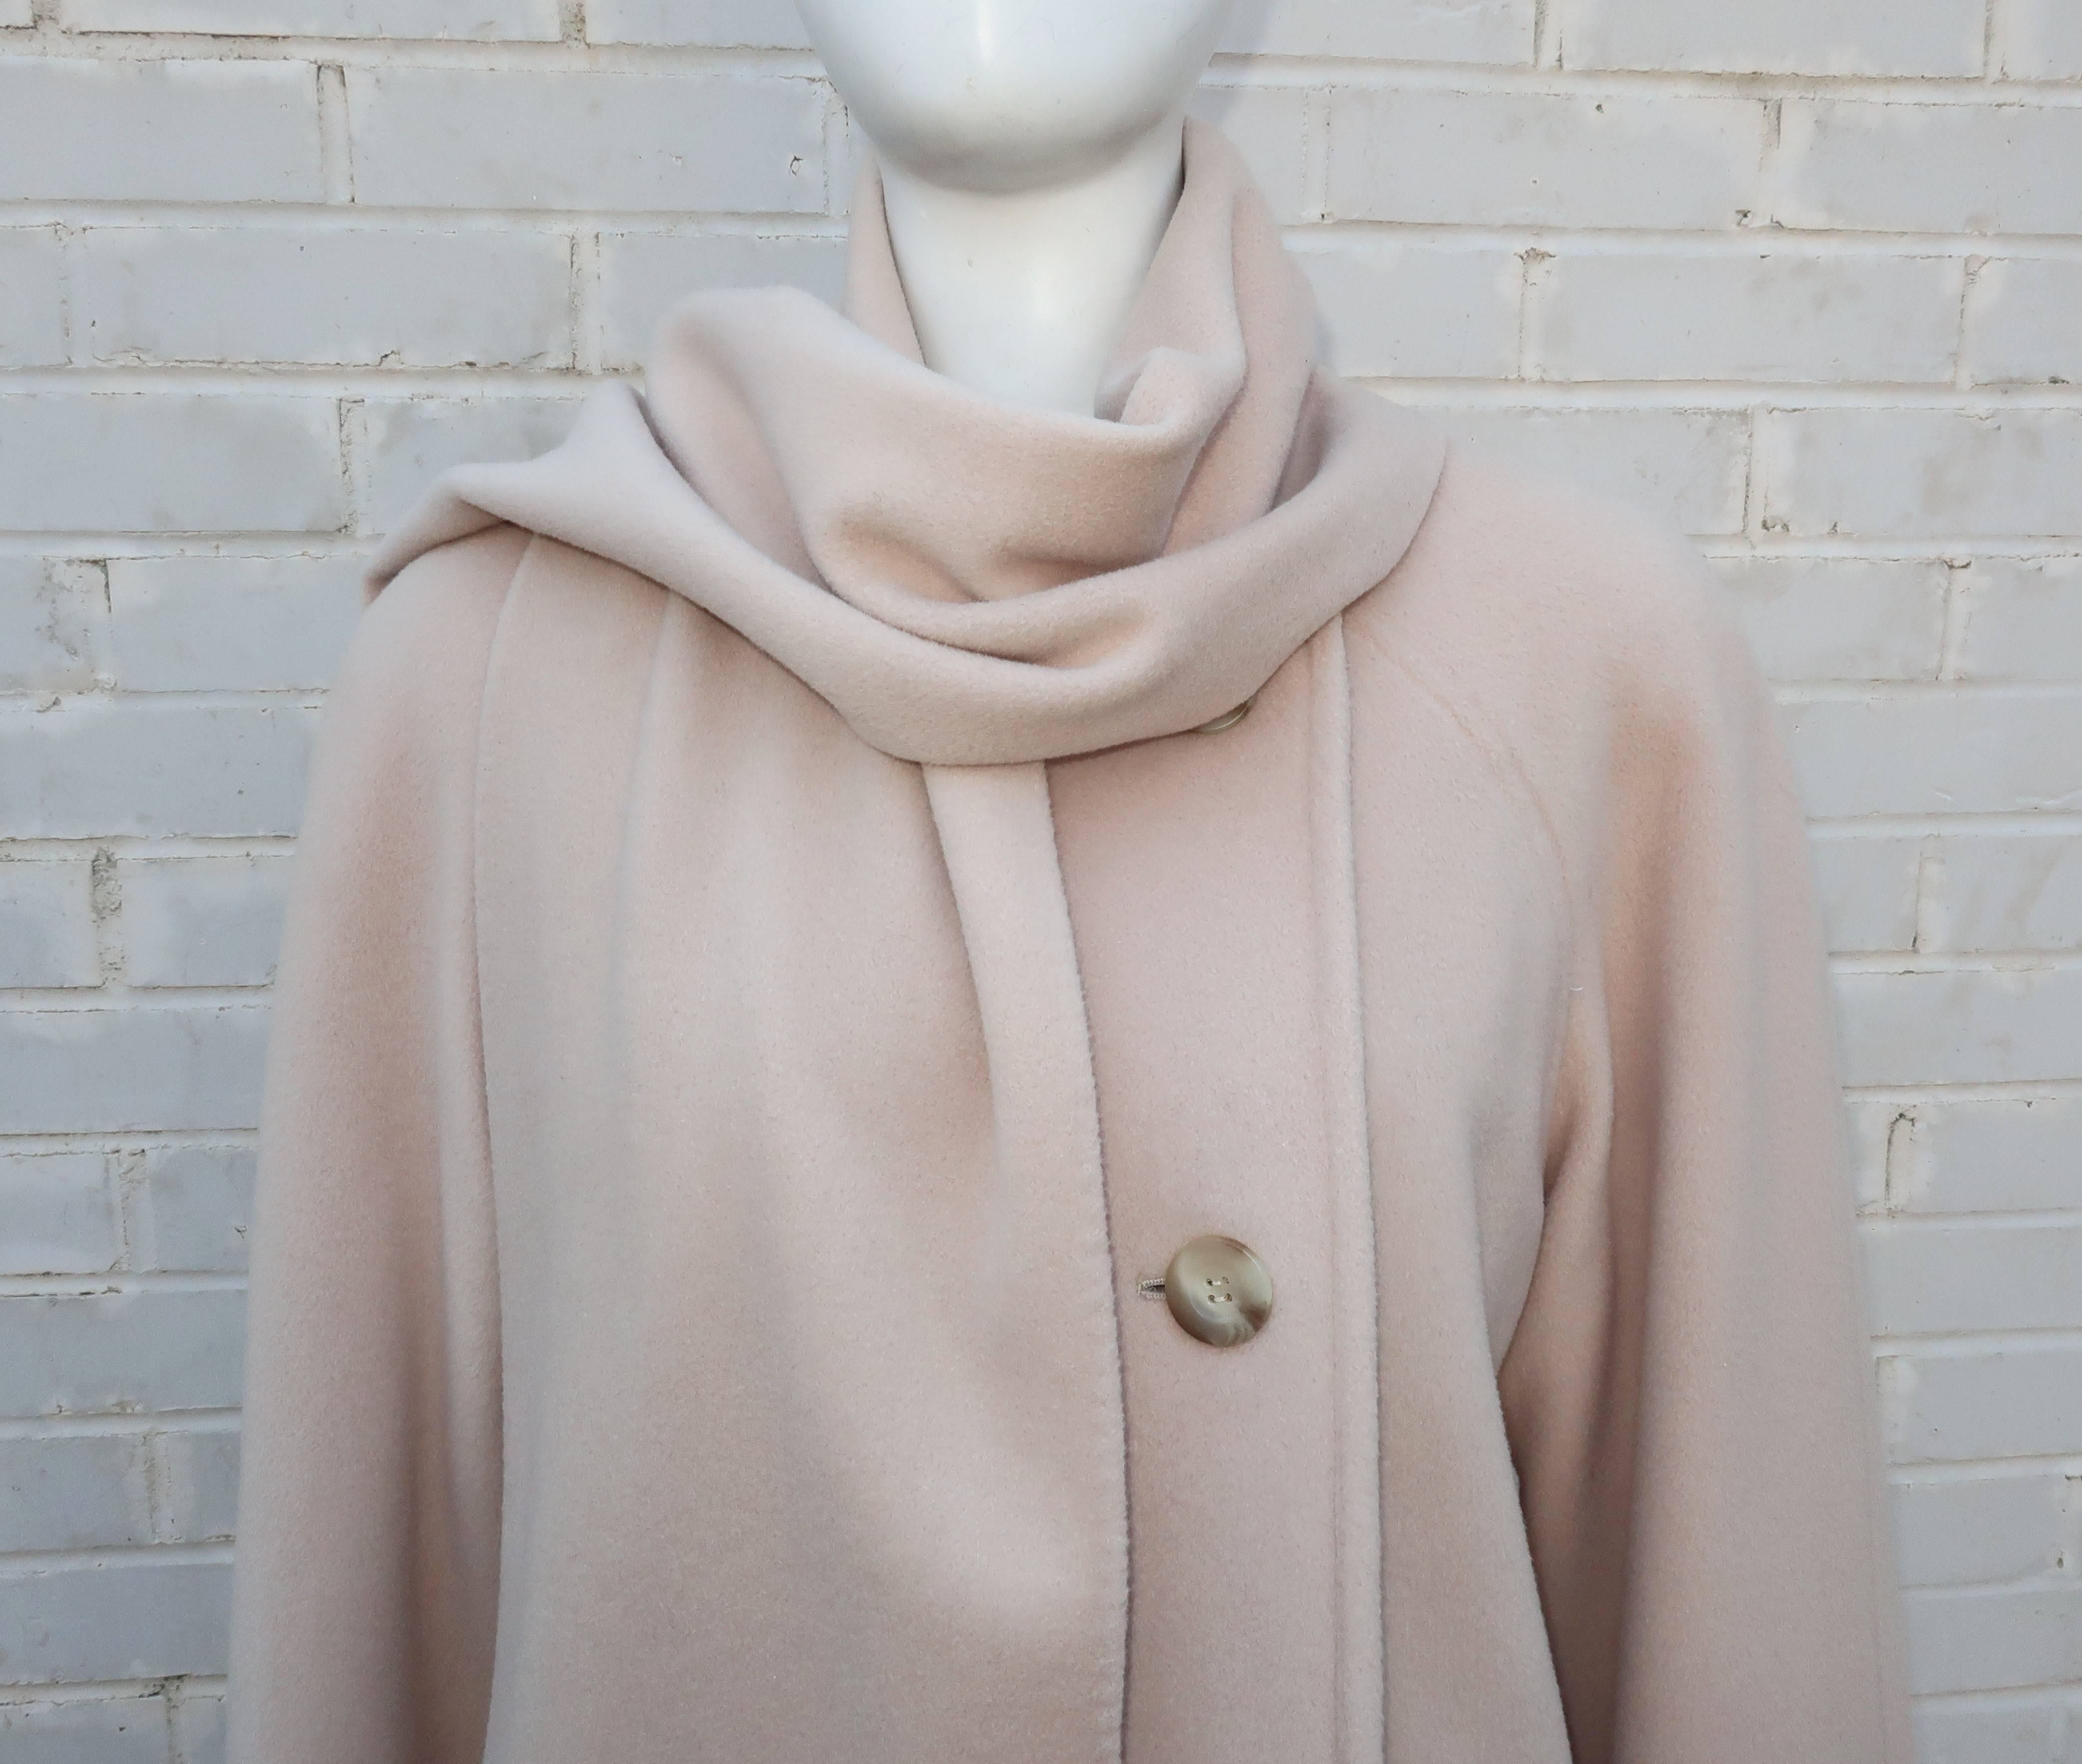 This 1980's Saks Fifth Avenue car coat is a classic combination of cozy cashmere with a stylish silhouette.  The light hued camel color bears just a touch of blush making it the perfect topper to transition into Spring.  It buttons up the side with